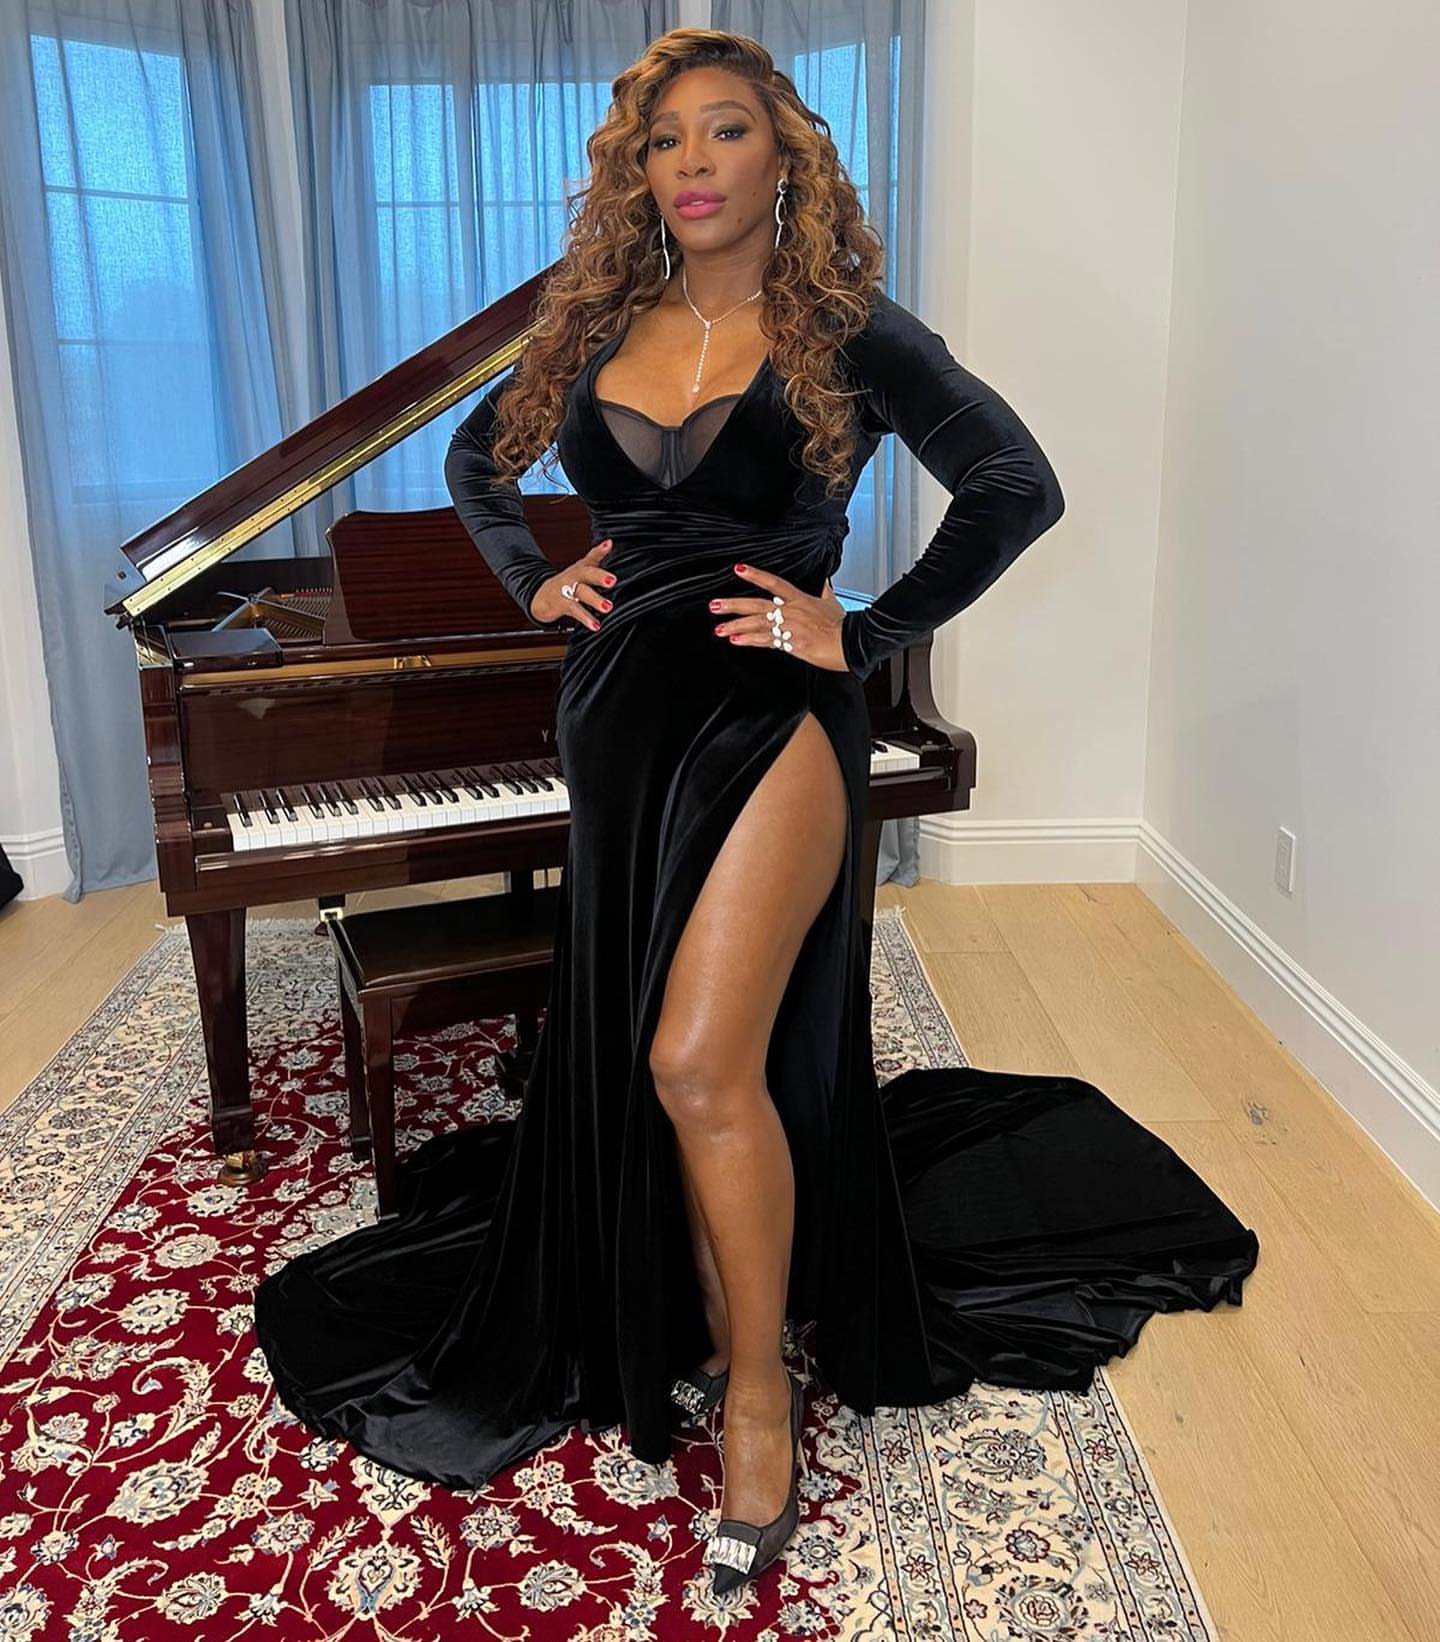 Photos n°15 : Serena Williams Shares Her Big Reveal!